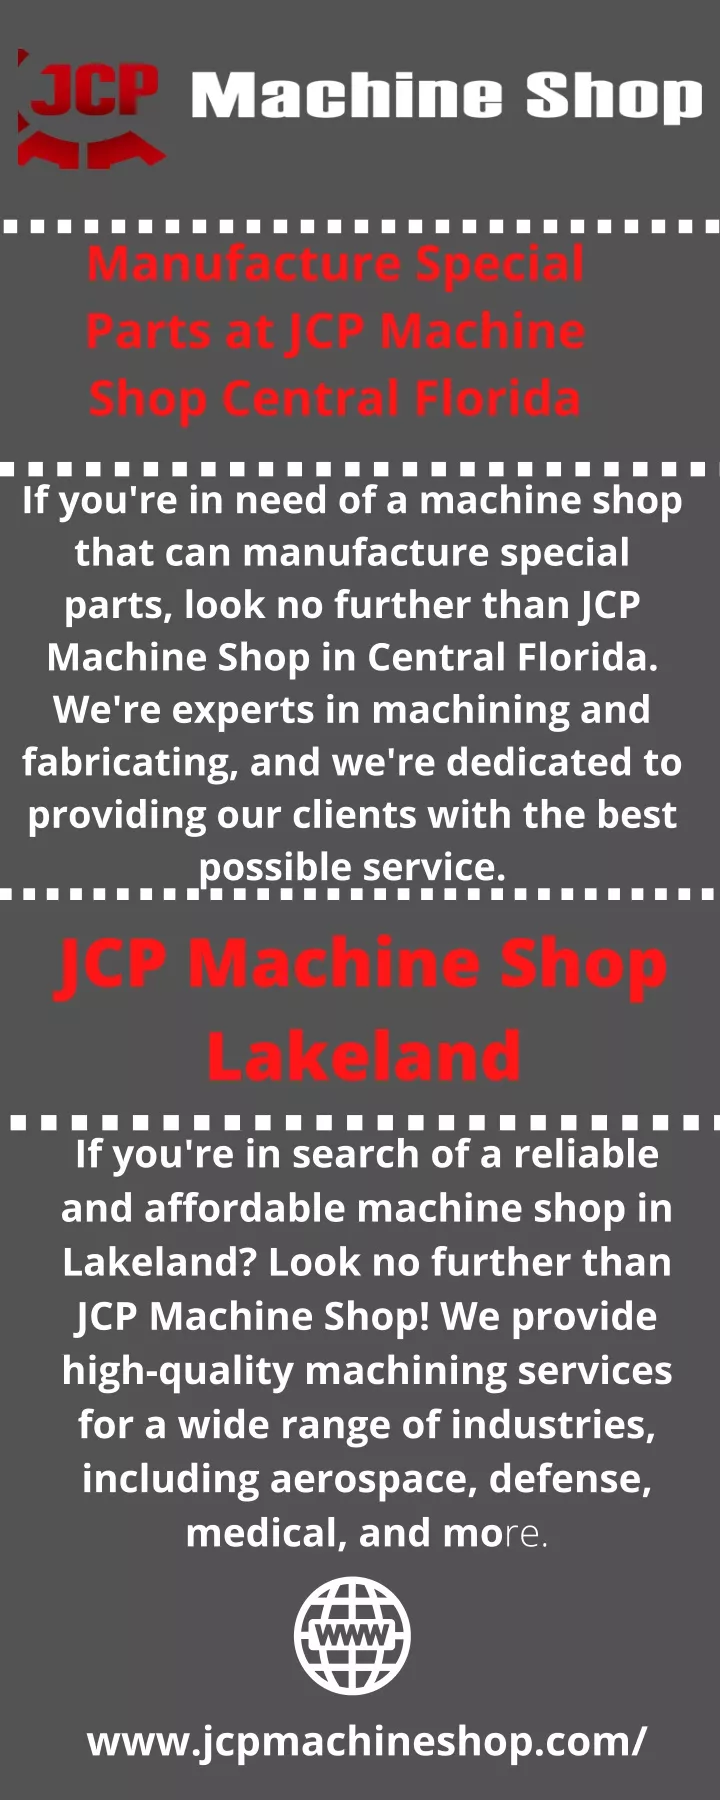 manufacture special parts at jcp machine shop